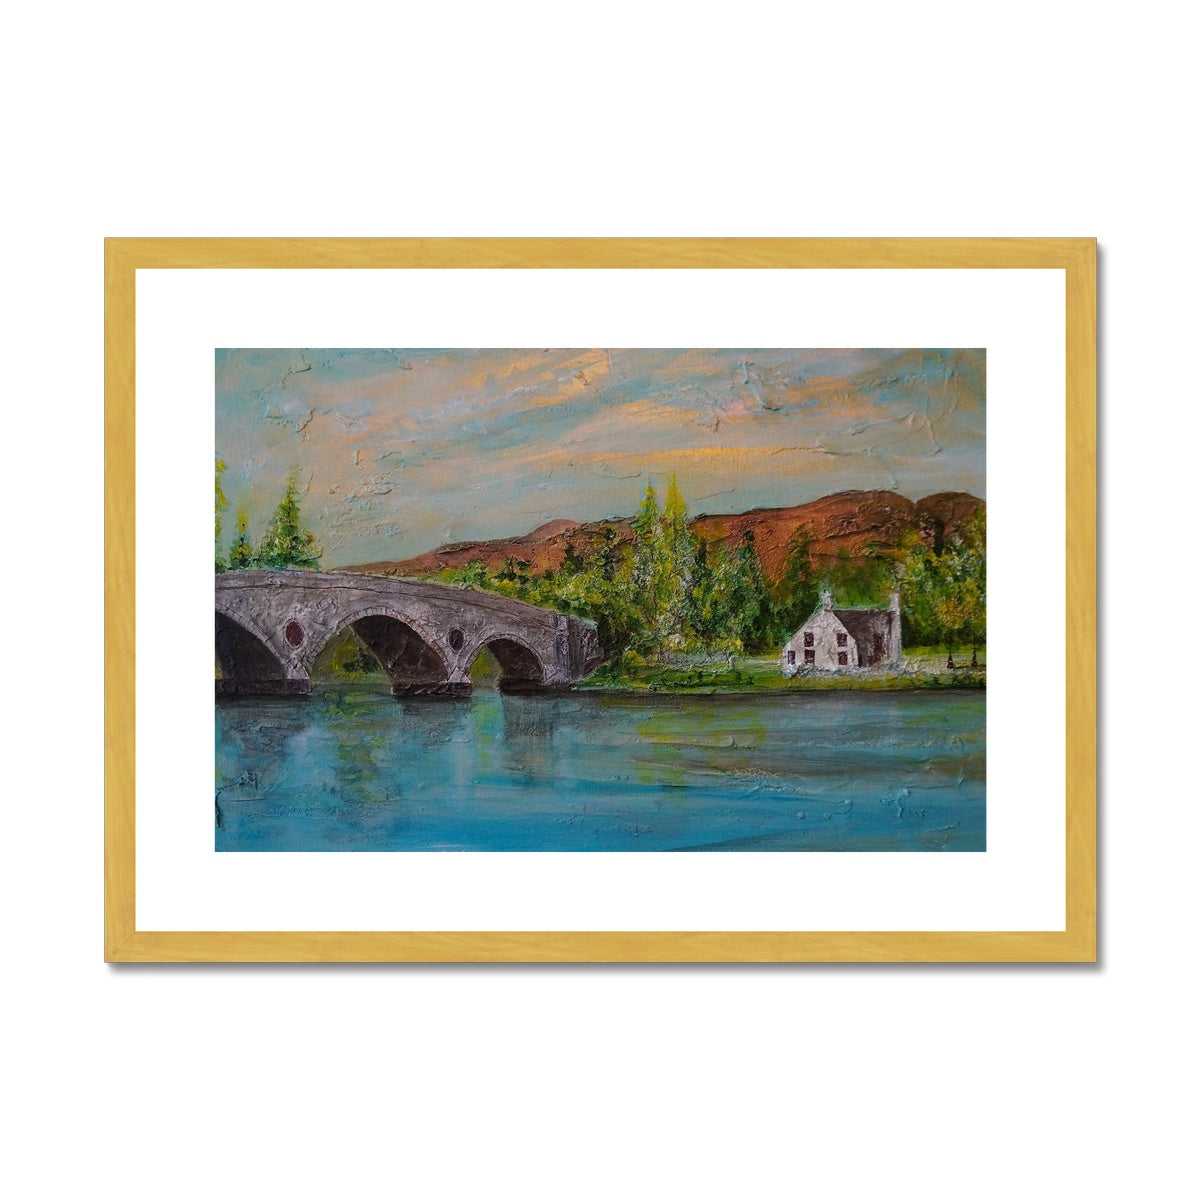 Kenmore Bridge ii Painting | Antique Framed & Mounted Prints From Scotland-Fine art-Scottish Highlands & Lowlands Art Gallery-A2 Landscape-Gold Frame-Paintings, Prints, Homeware, Art Gifts From Scotland By Scottish Artist Kevin Hunter